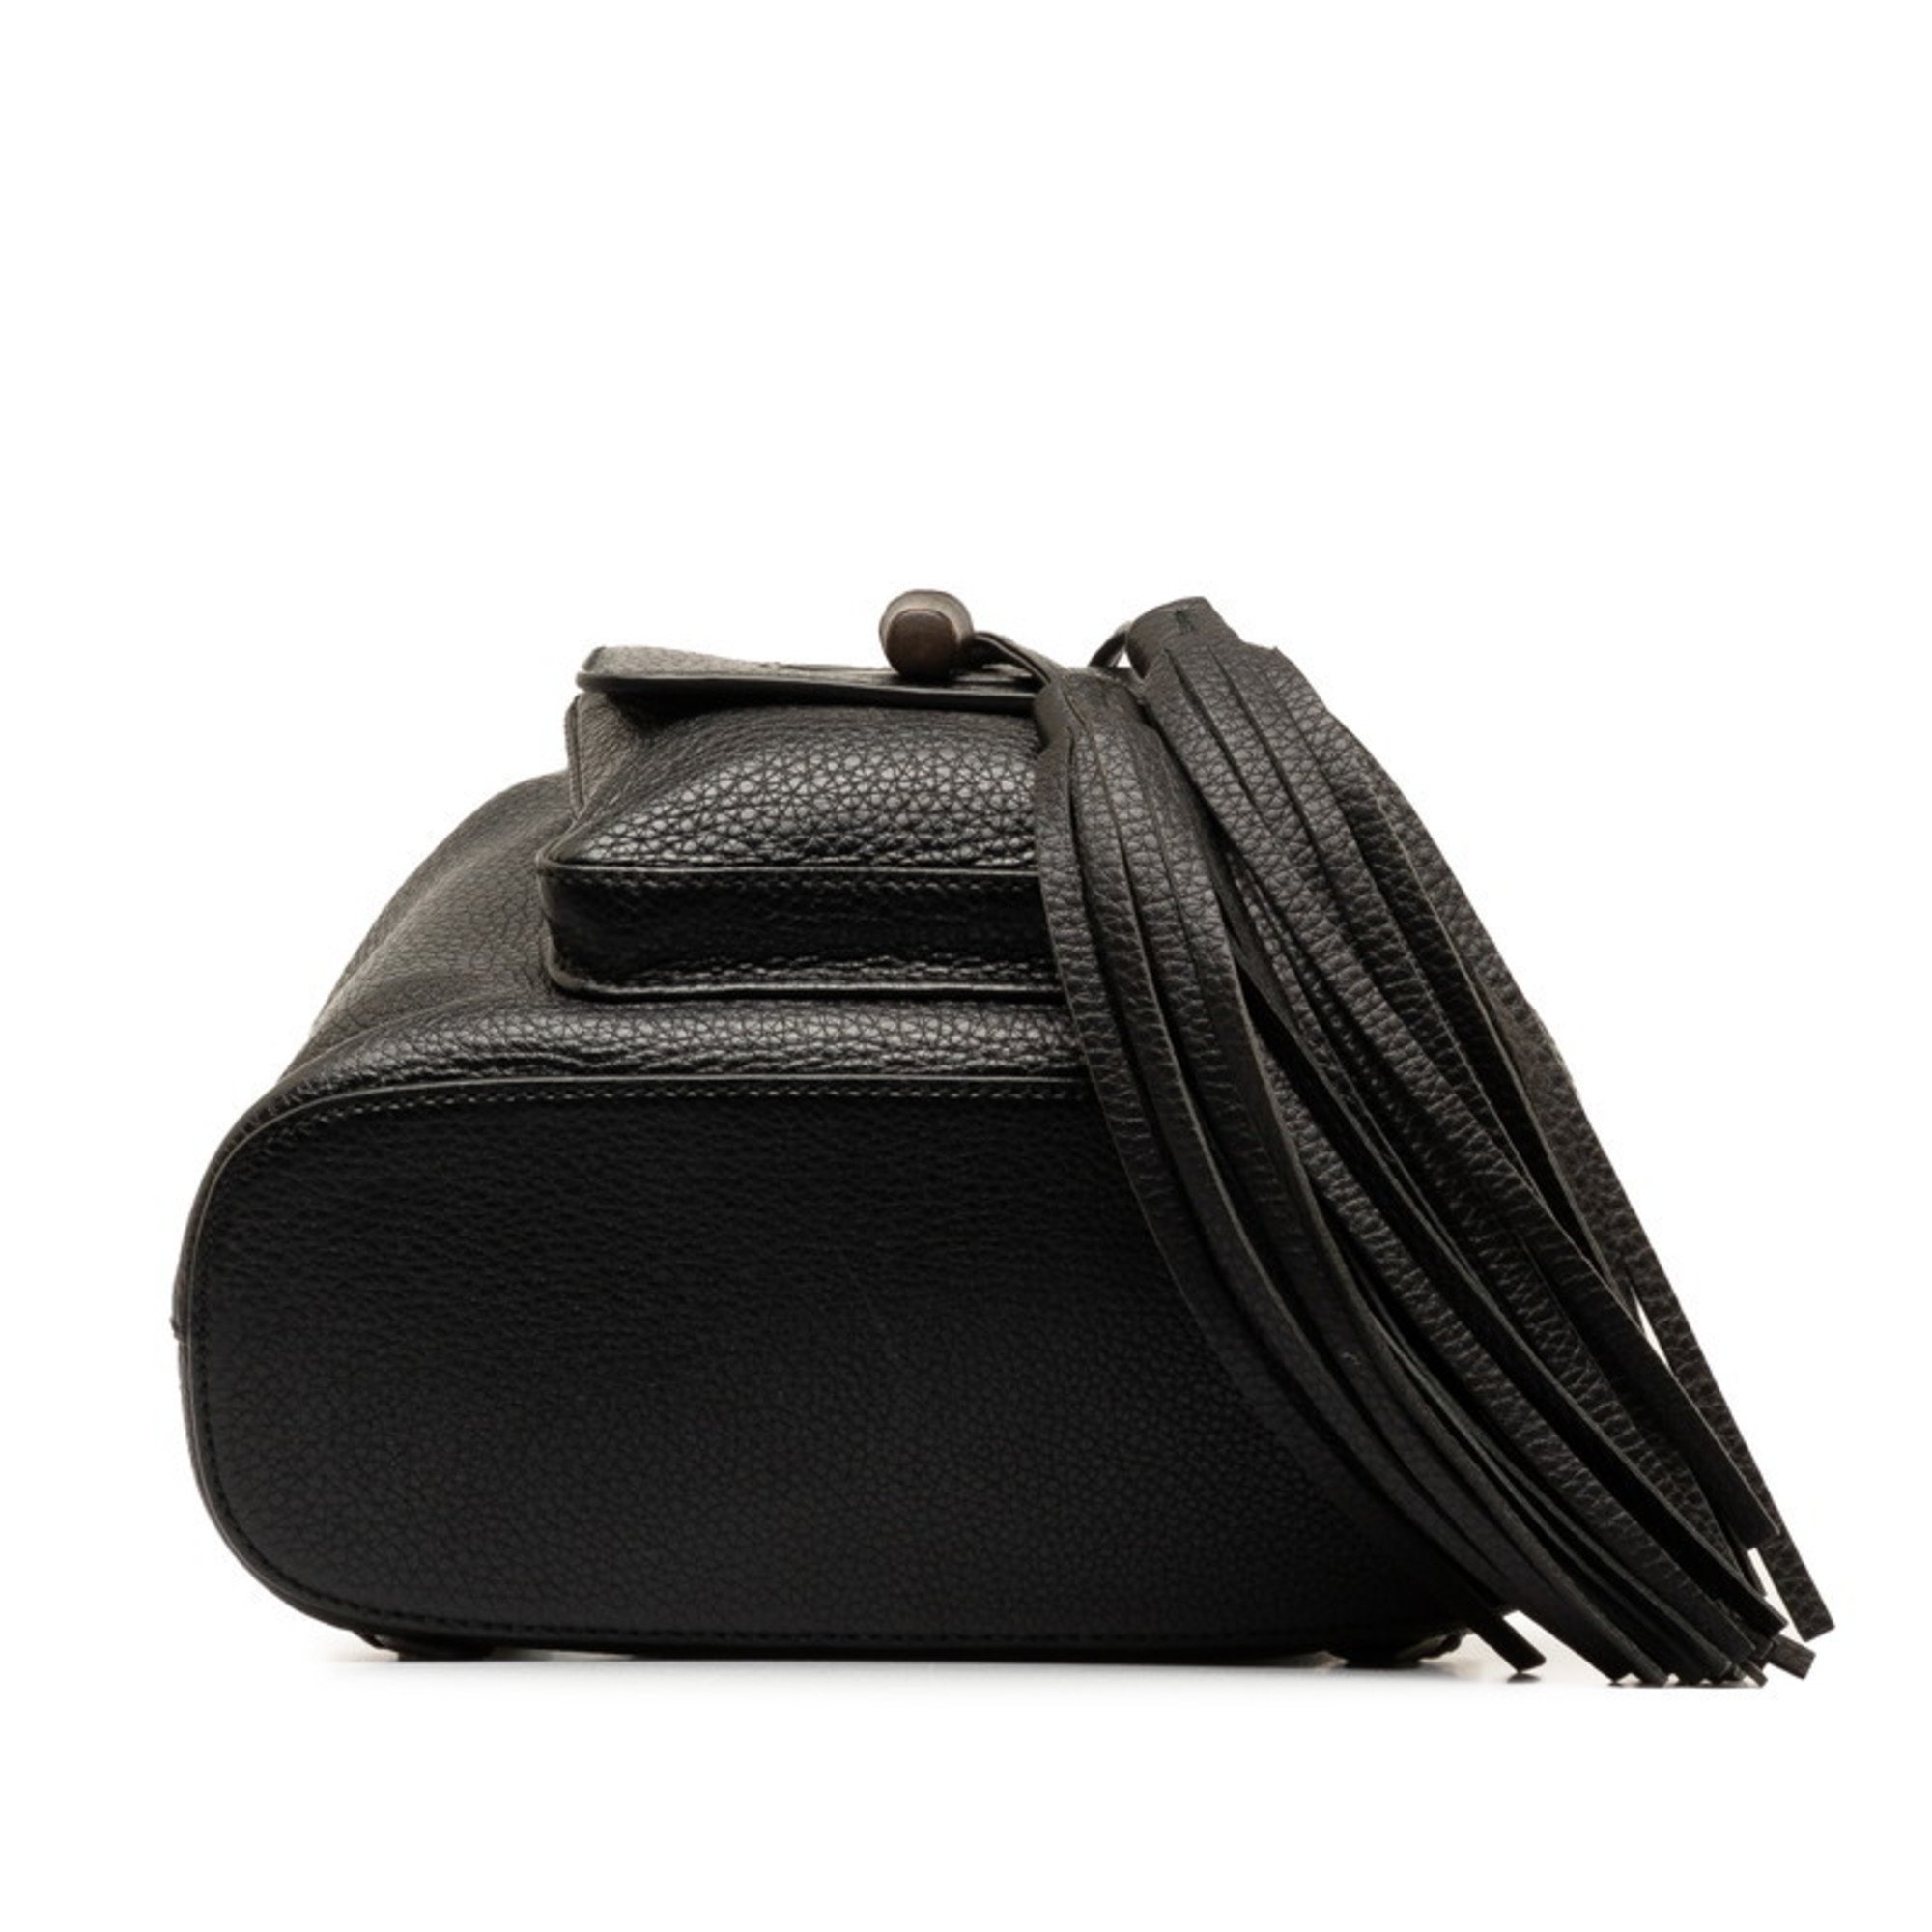 Gucci Bamboo Tassel Backpack 387149 Black Leather Women's GUCCI